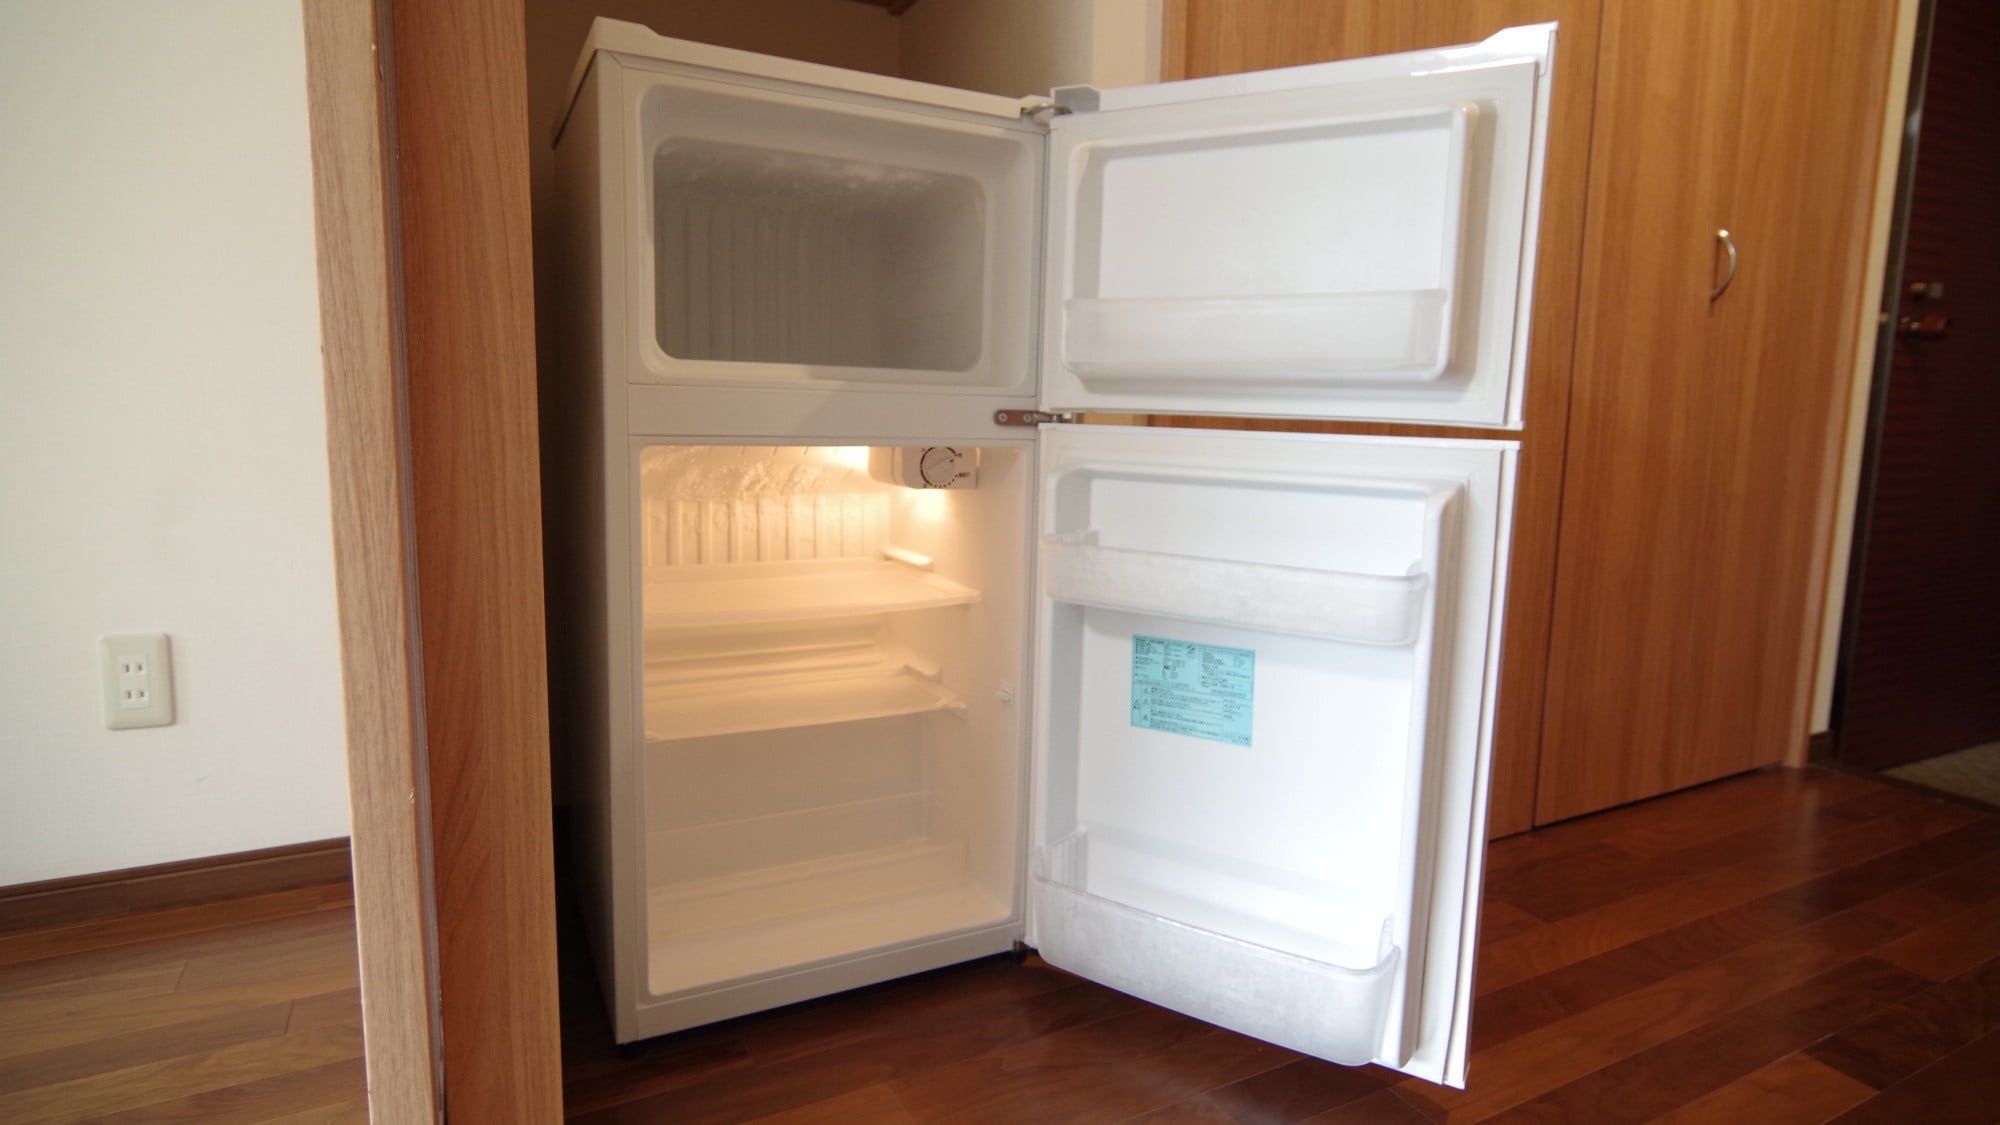 ★Common to all rooms★Guest room refrigerator (empty. OK to bring your own)